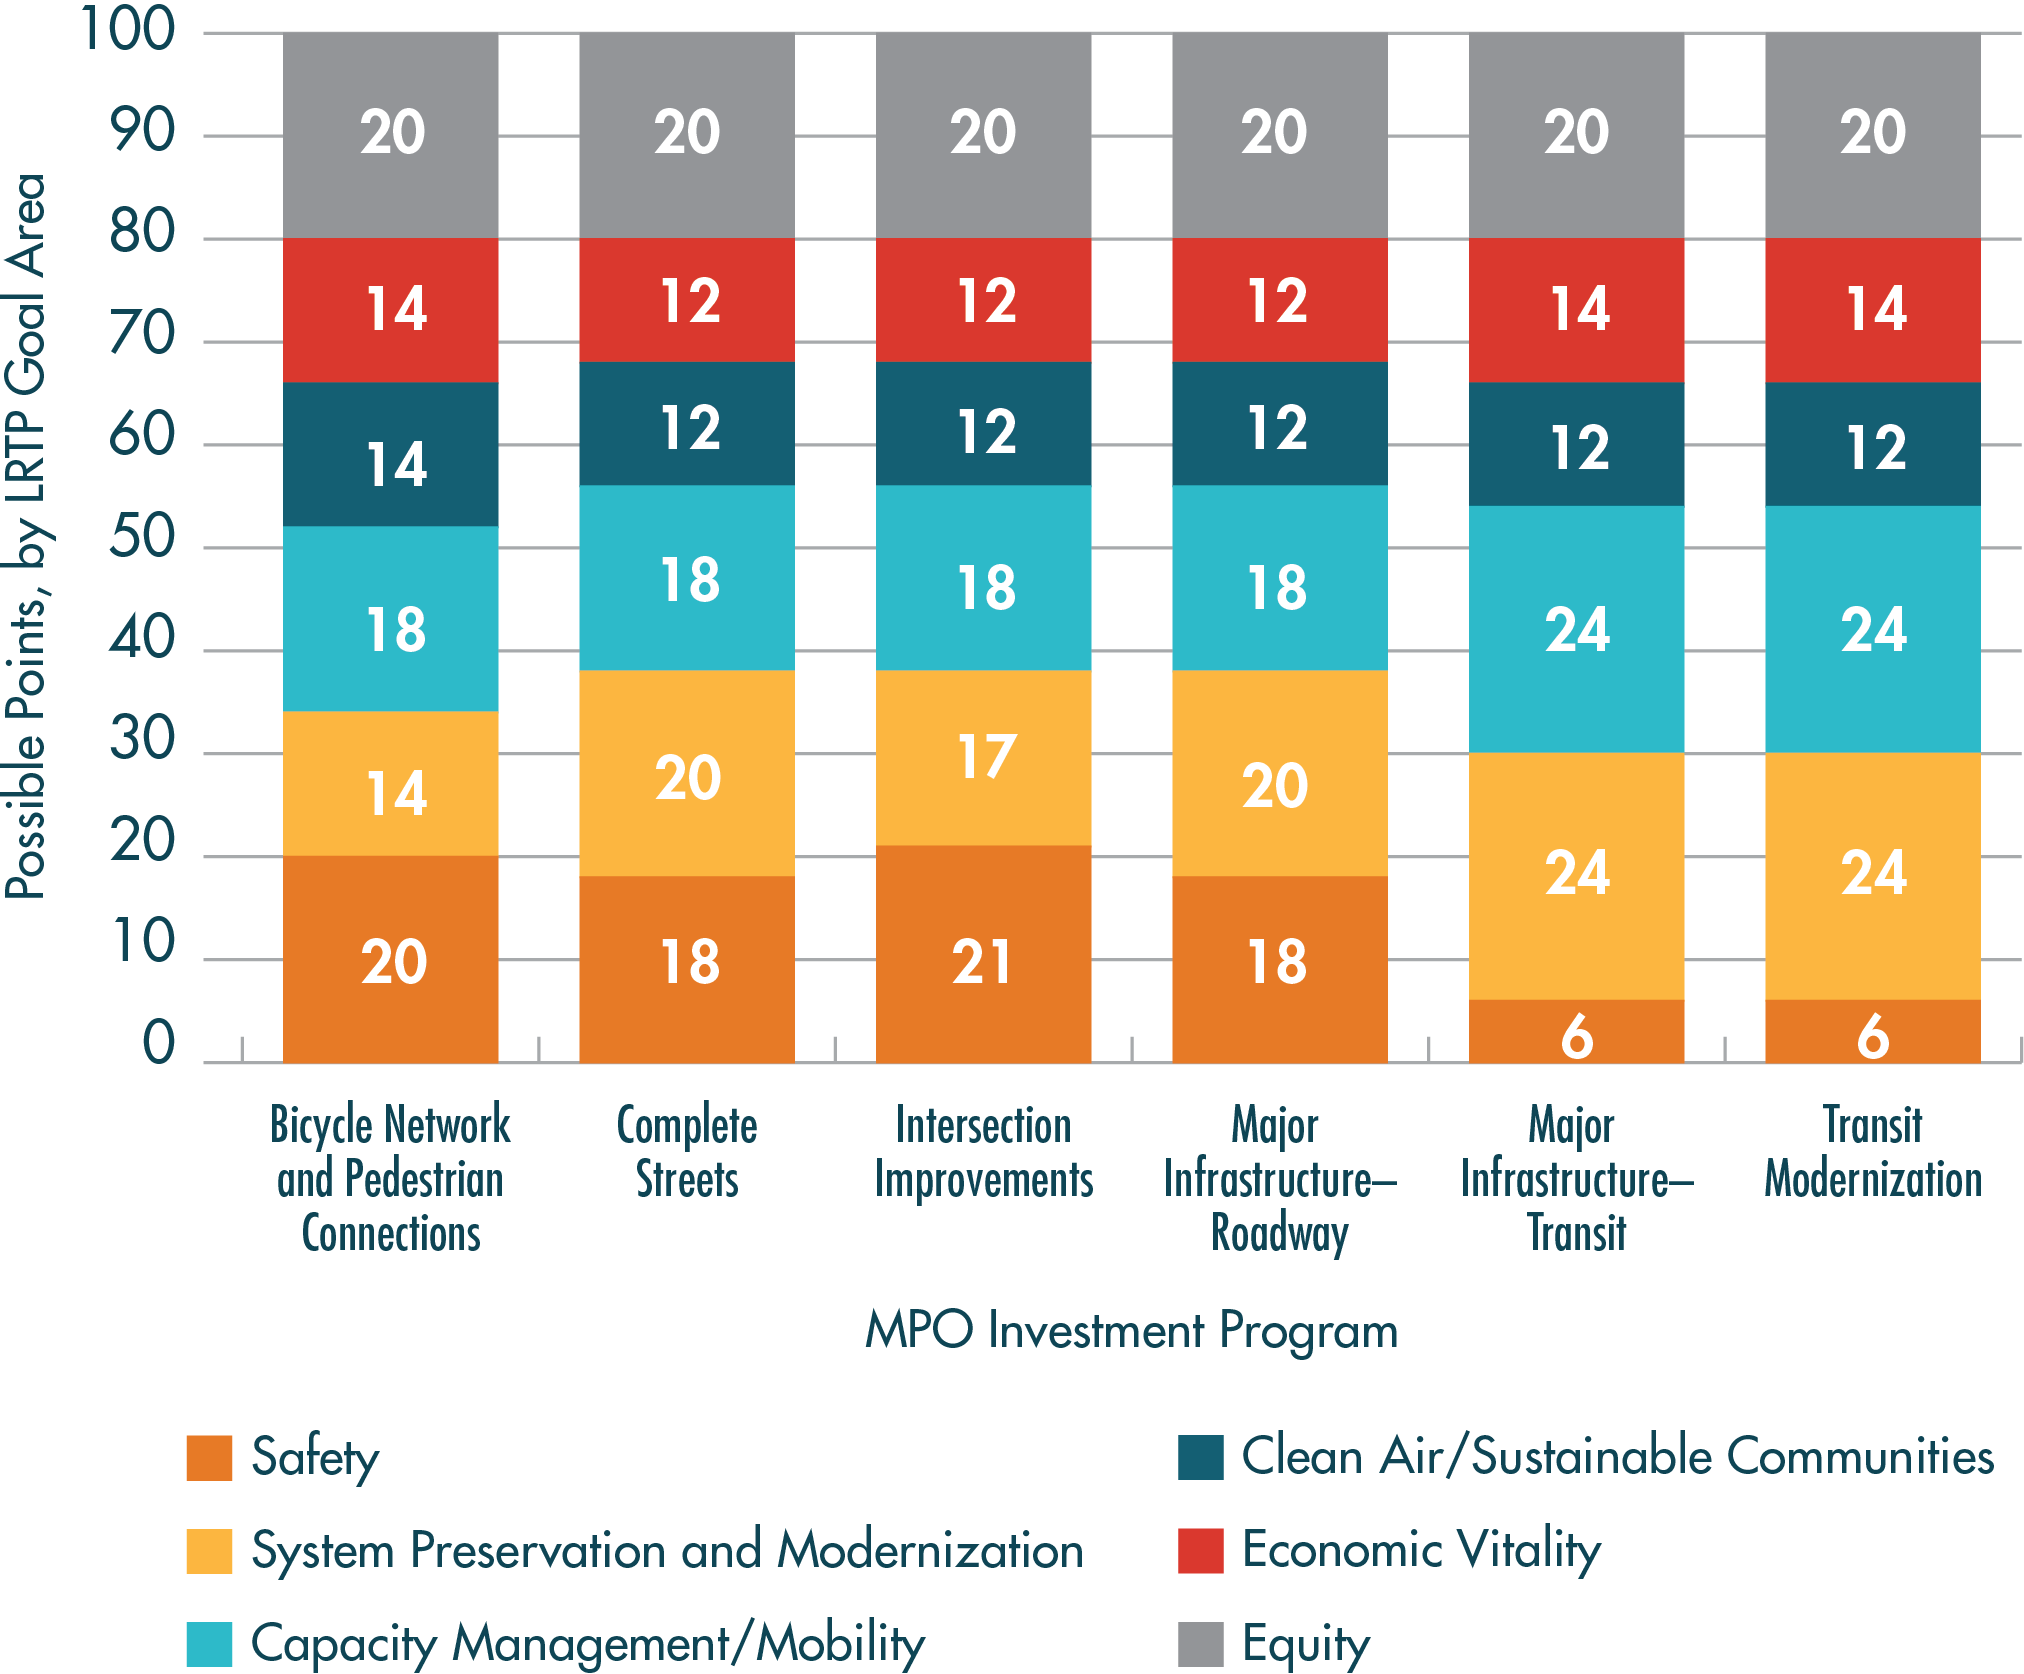 Figure 2-4 is a bar chart that shows the distribution of points across the six scoring areas considered when evaluating projects for funding through the MPO’s Bicycle Network and Pedestrian Connections, Complete Streets, Intersection Improvements, Major Infrastructure, and Transit Modernization investment programs. Each bar reflects the varying points by goal area across project types, emphasizing that different types of projects are designed to accomplish different goals. These criteria were used to score new projects considered in these programs for the FFYs 2023–27 TIP.